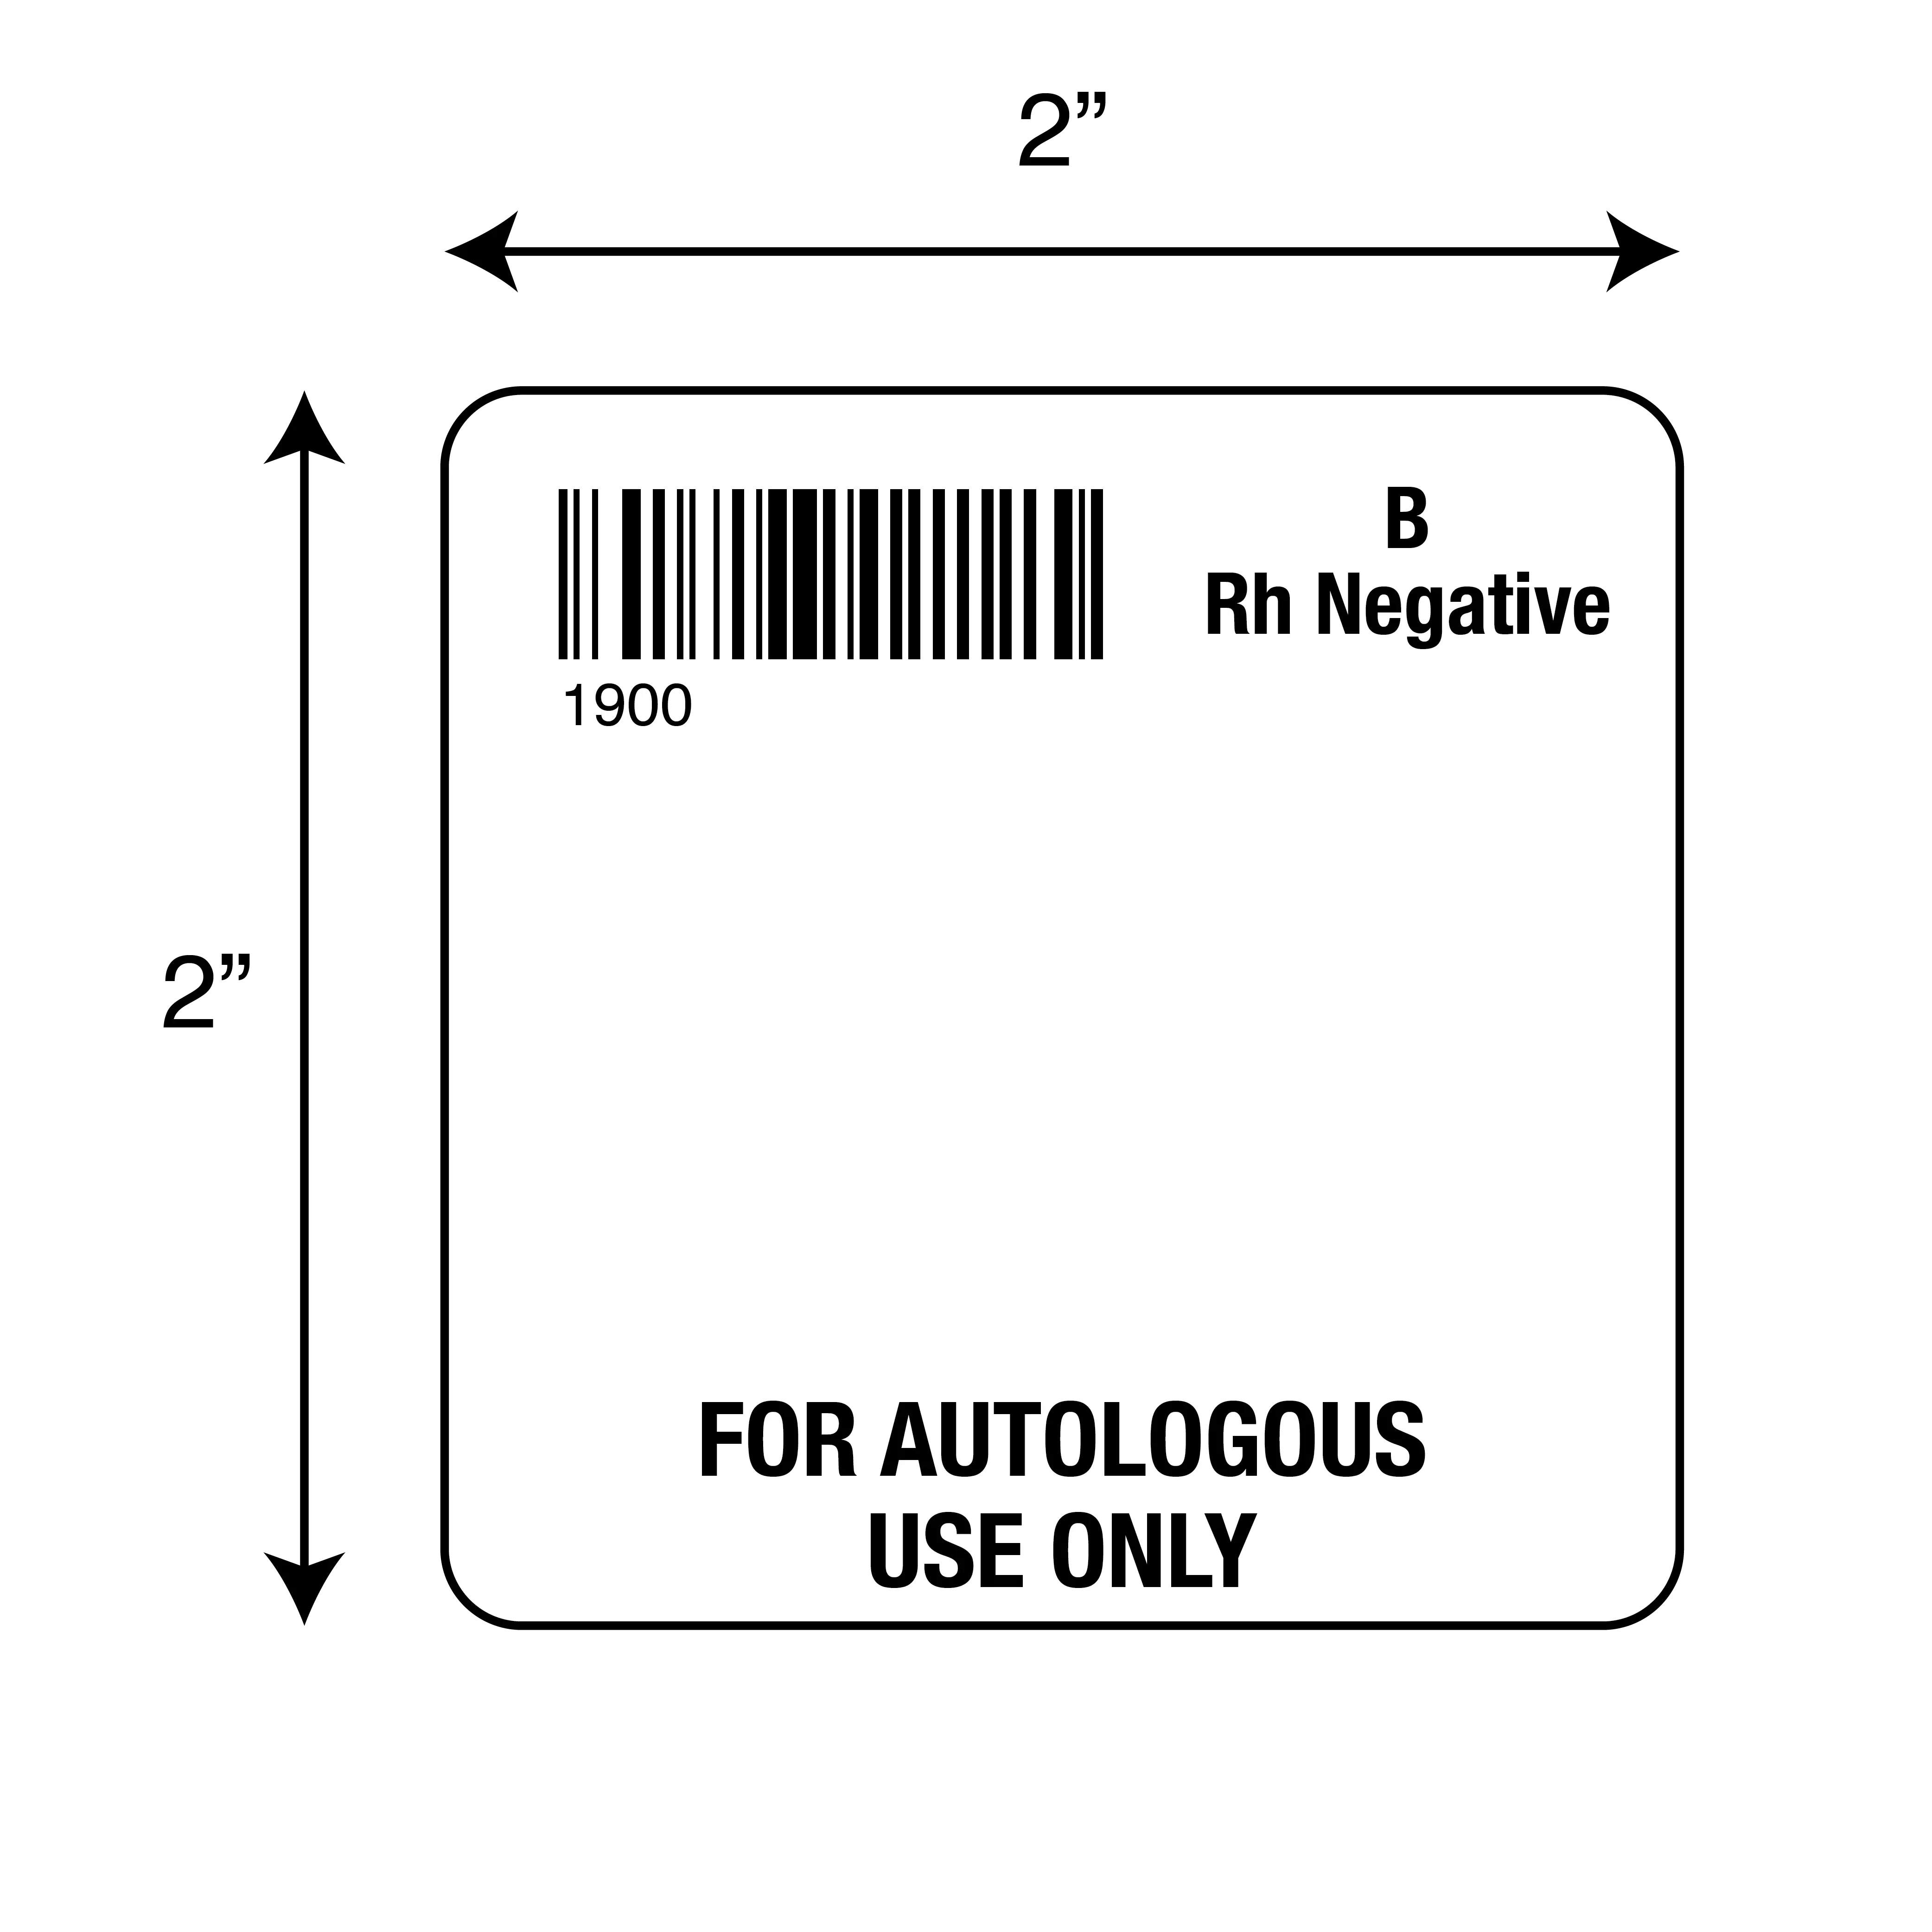 ISBT 128 B Rh Negative For Autologous Use Only